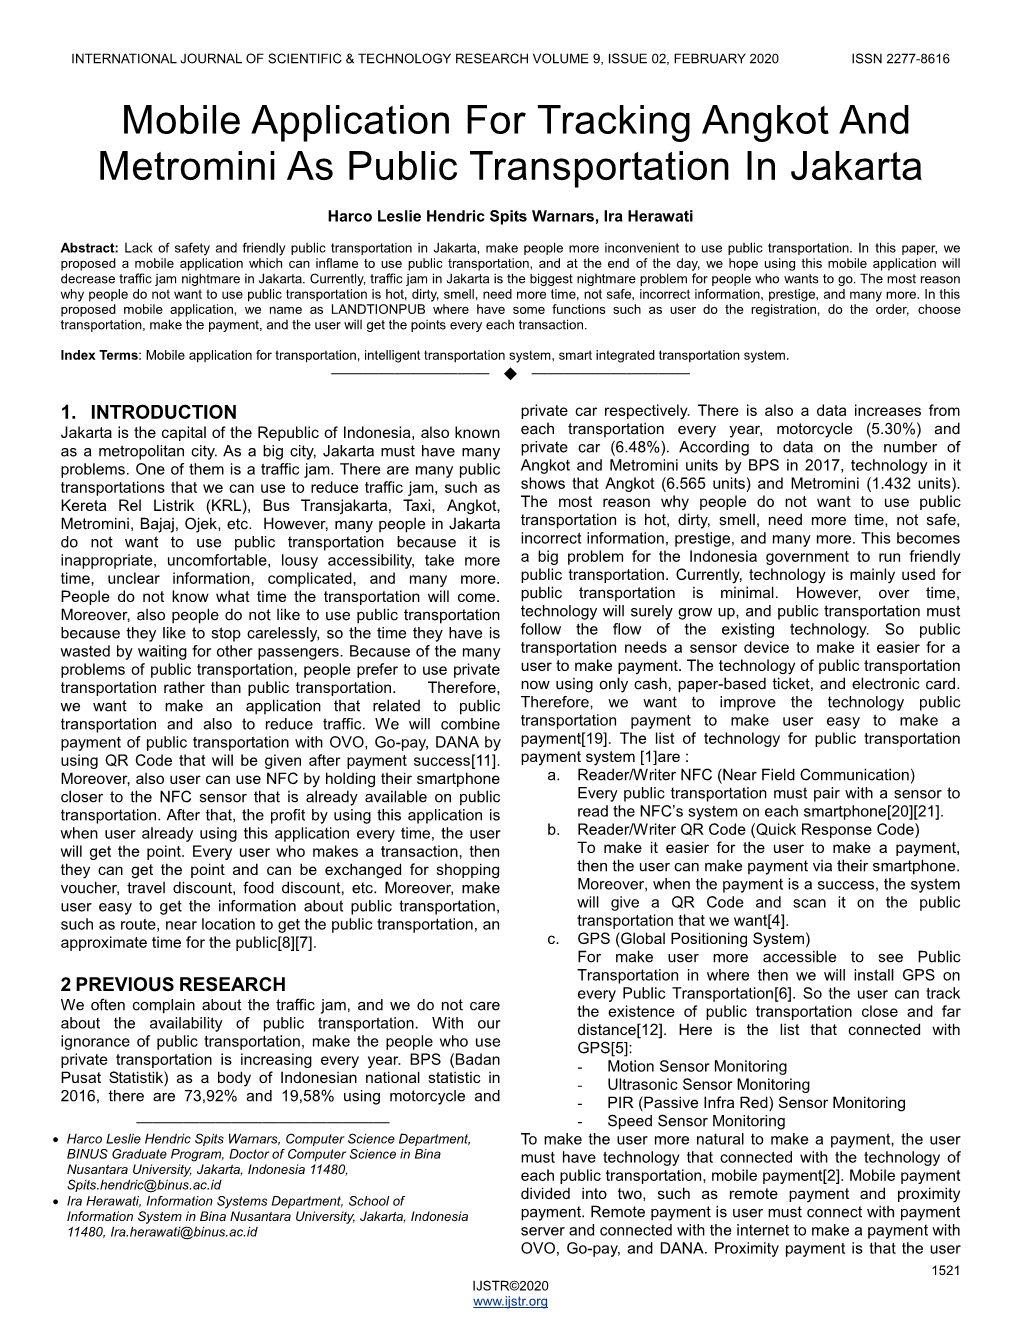 Mobile Application for Tracking Angkot and Metromini As Public Transportation in Jakarta